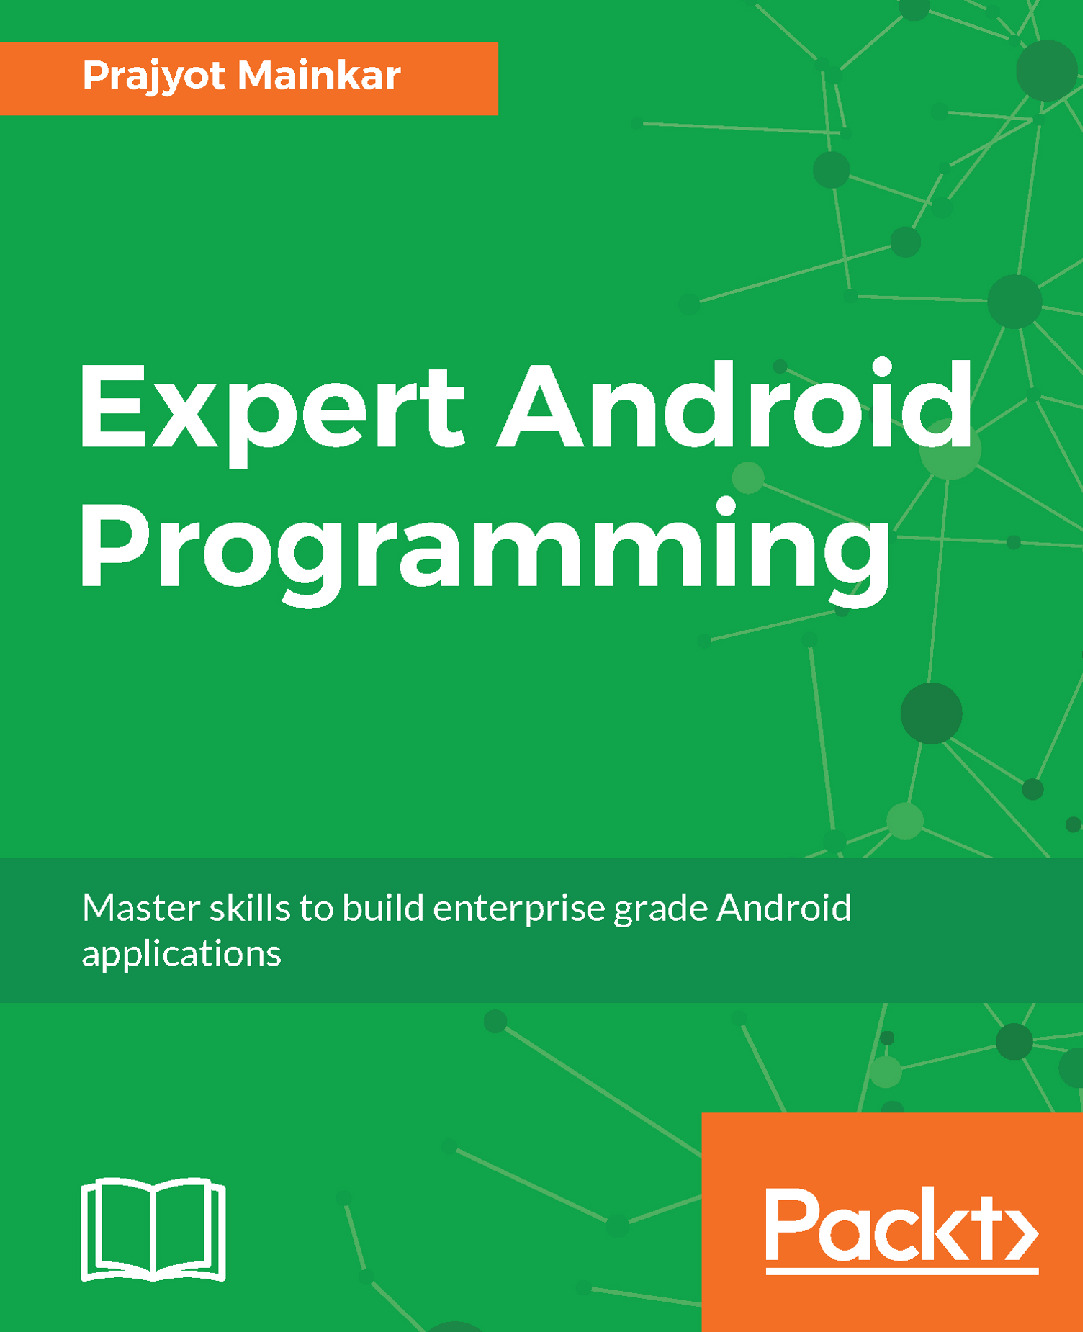 Expert Android Programming_ Master skills to build enterprise grade Android applications